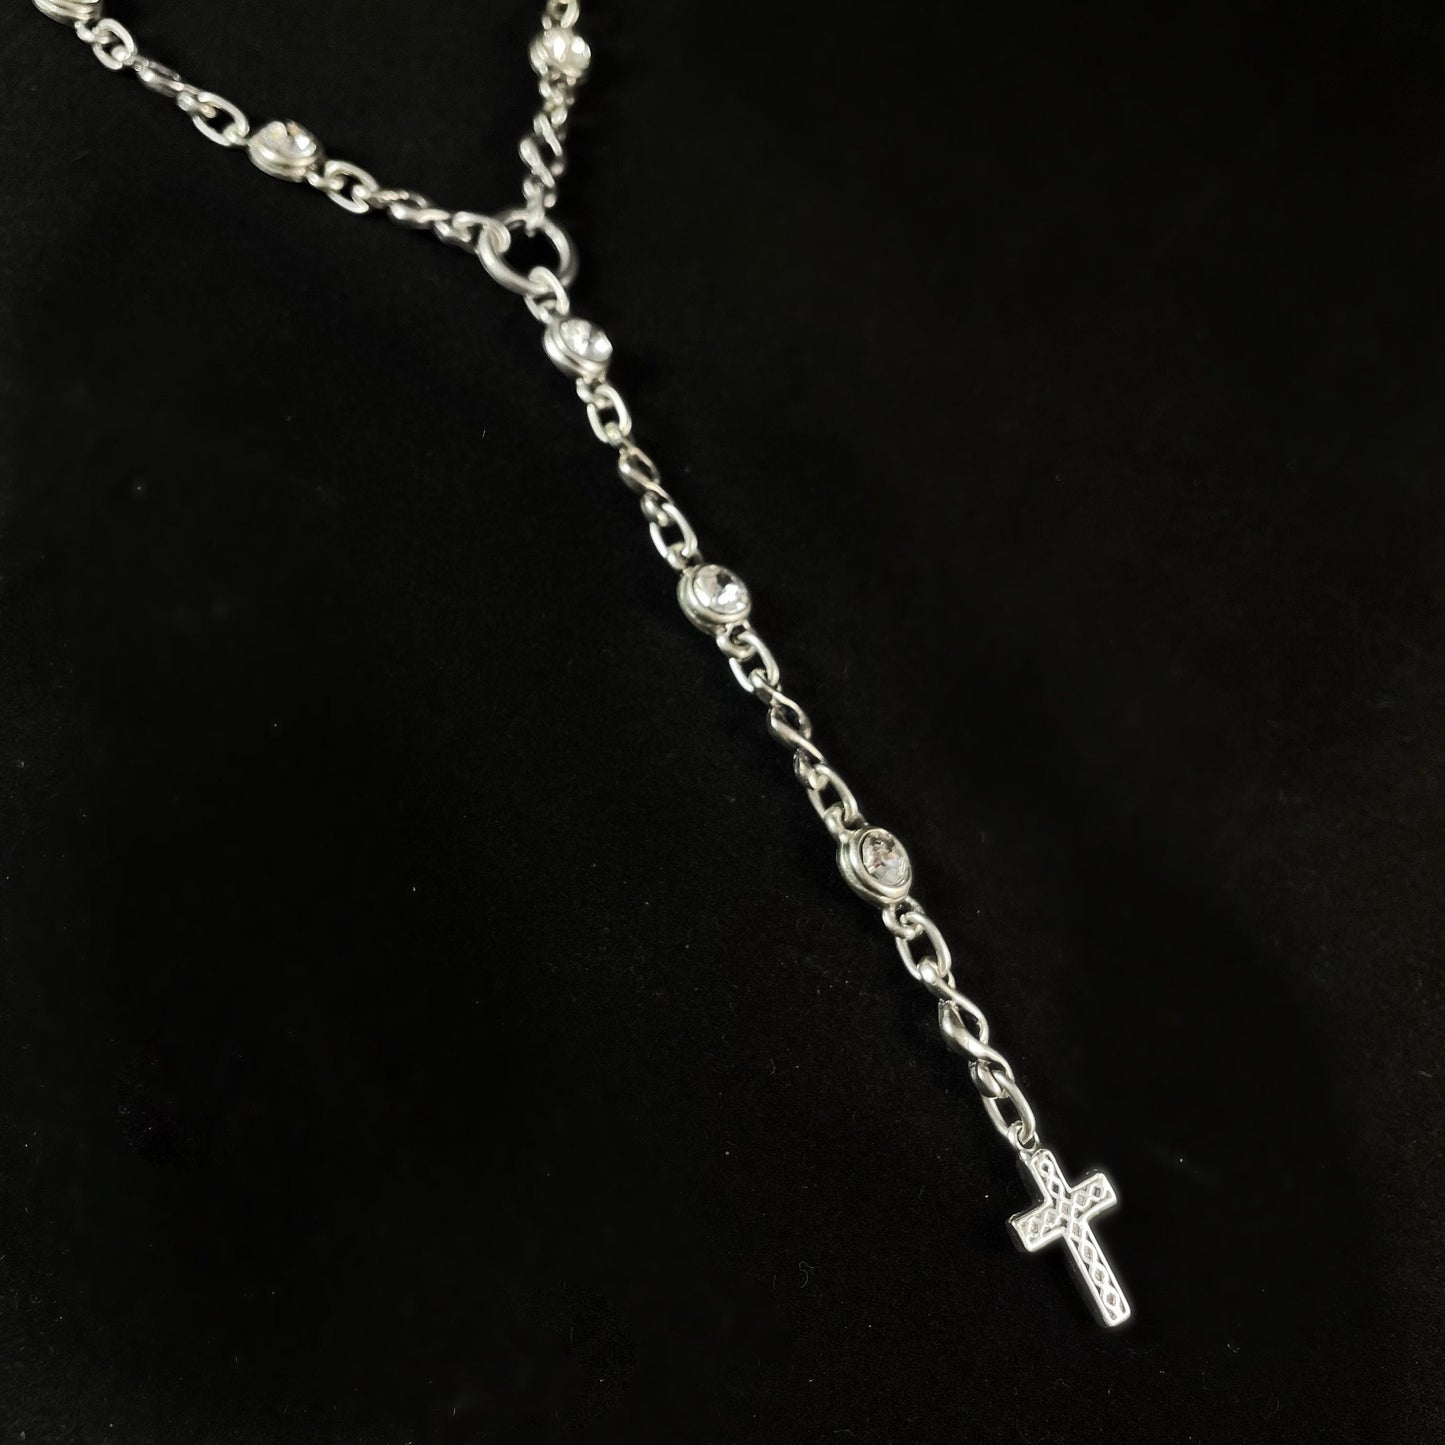 Long Silver Cross Necklace with Crystals, Handmade, Nickel Free